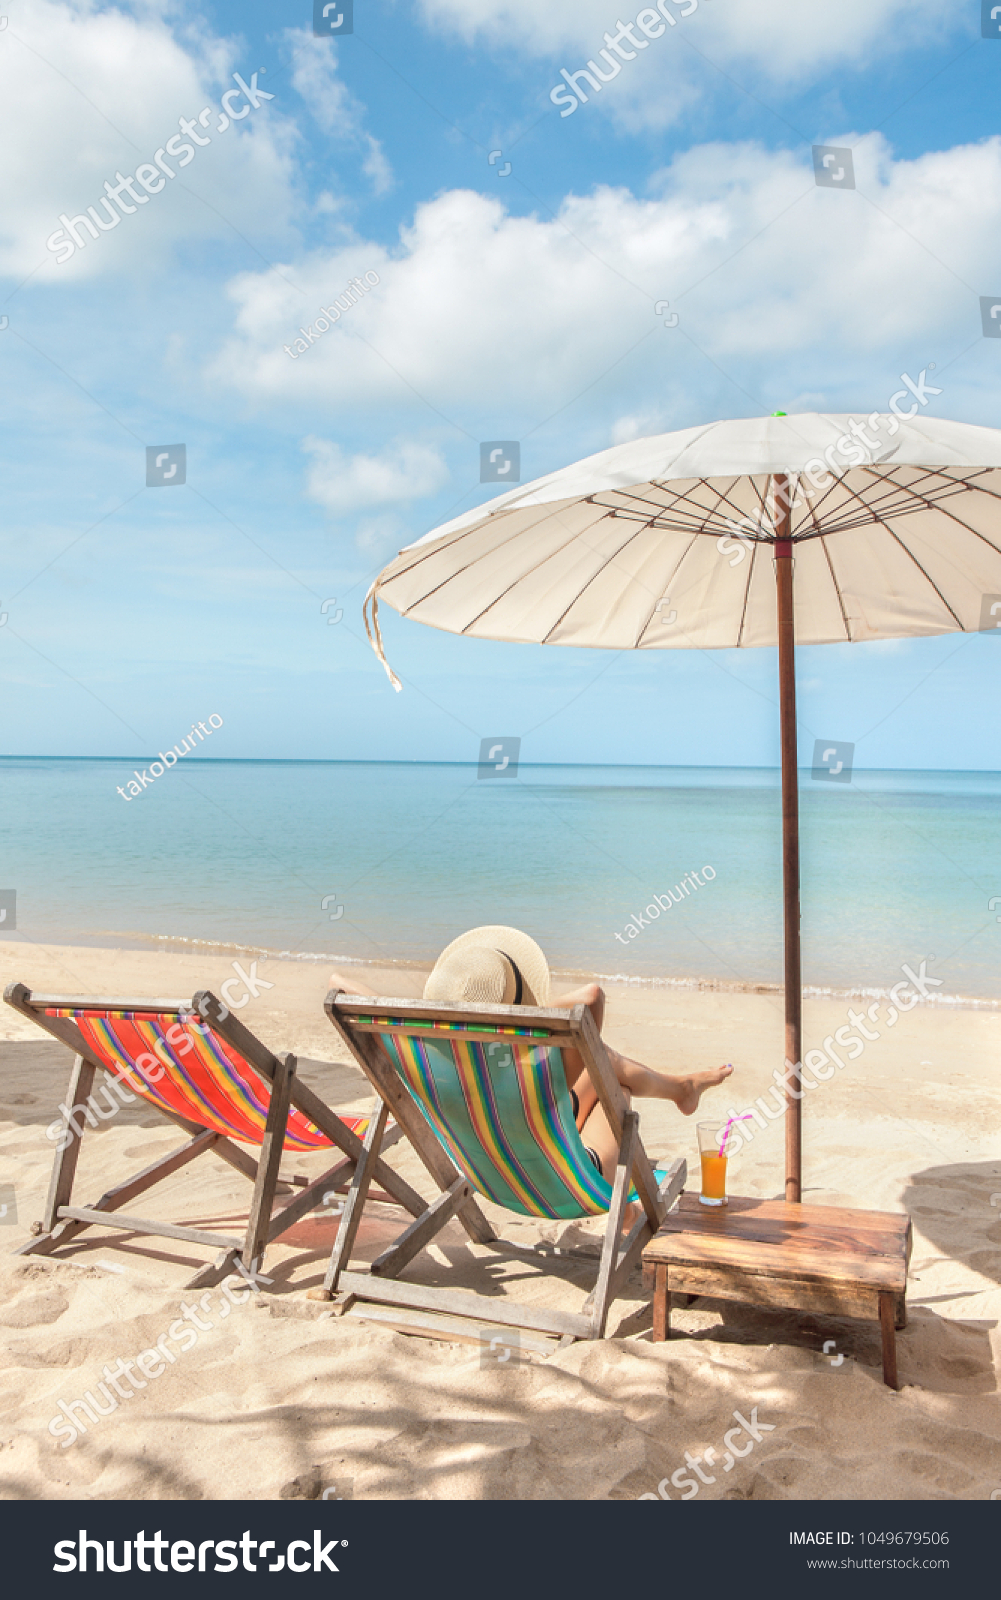 Woman at beautiful beach sitting on chaise-lounge and drinking cocktail top view #1049679506